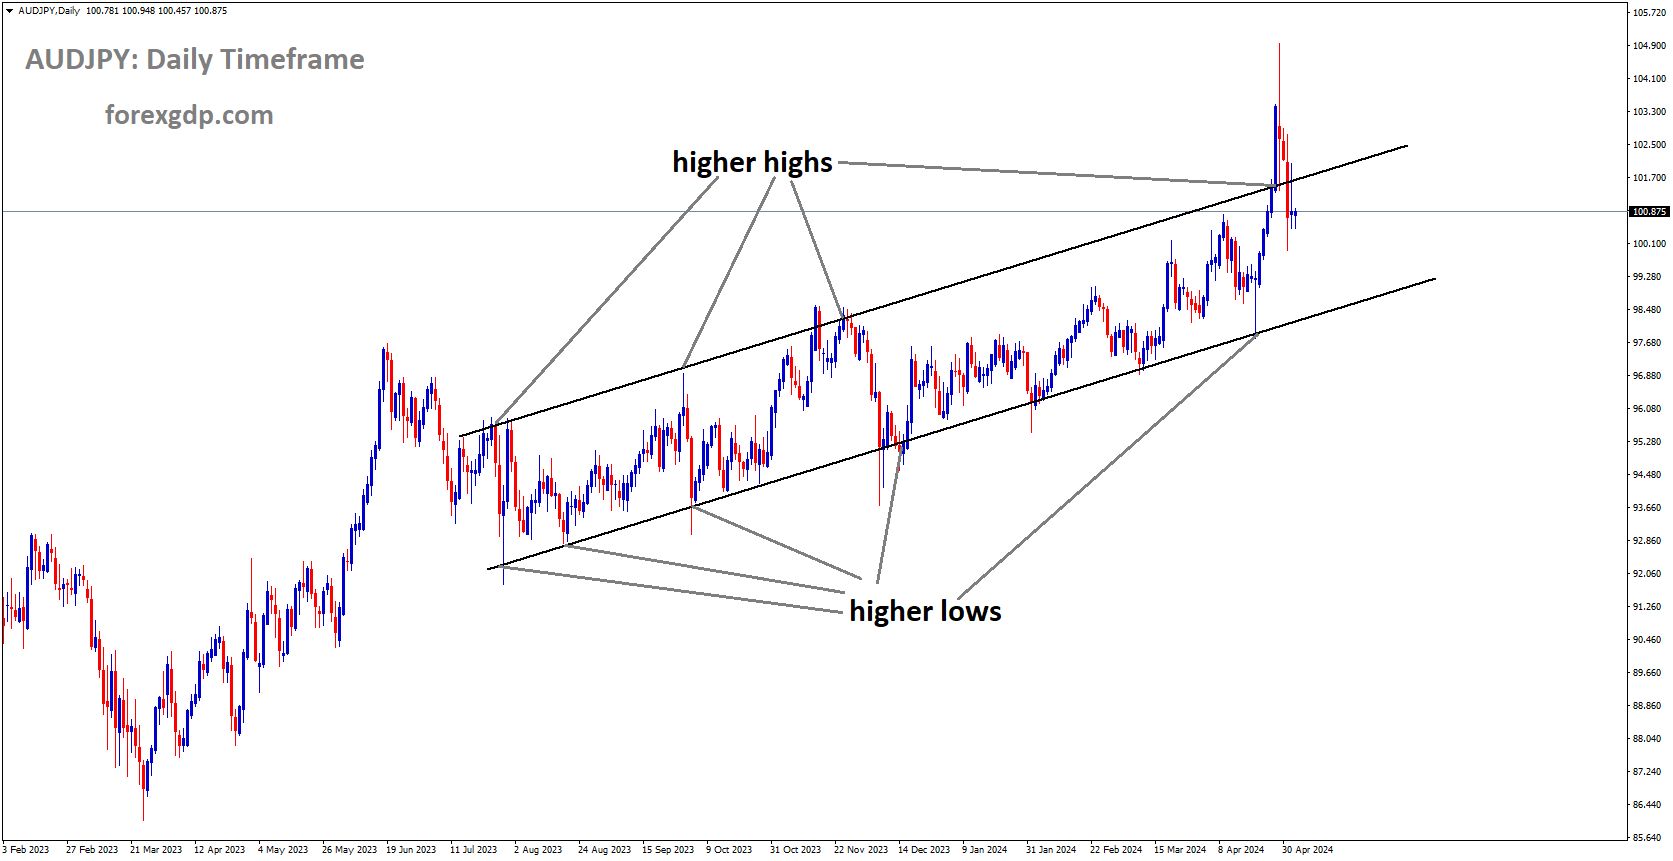 AUDJPY is moving in Ascending channel and market has fallen from the higher high area of the channel